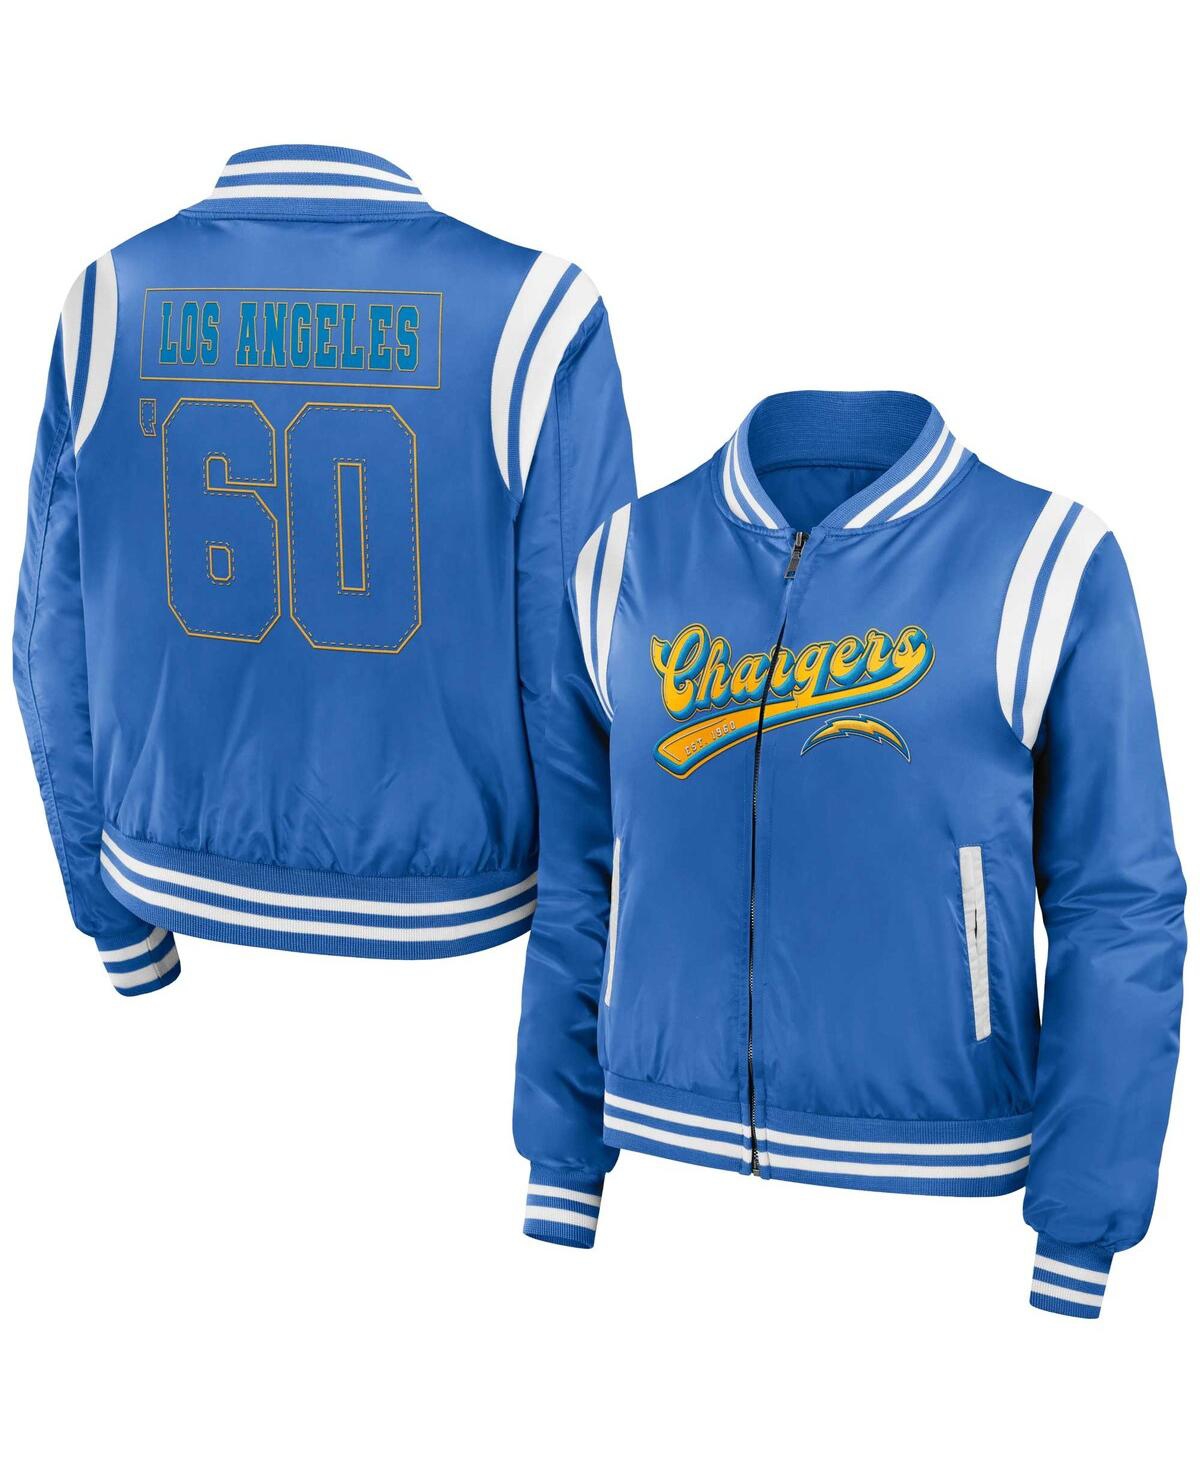 Shop Wear By Erin Andrews Women's  Powder Blue Los Angeles Chargers Bomber Full-zip Jacket